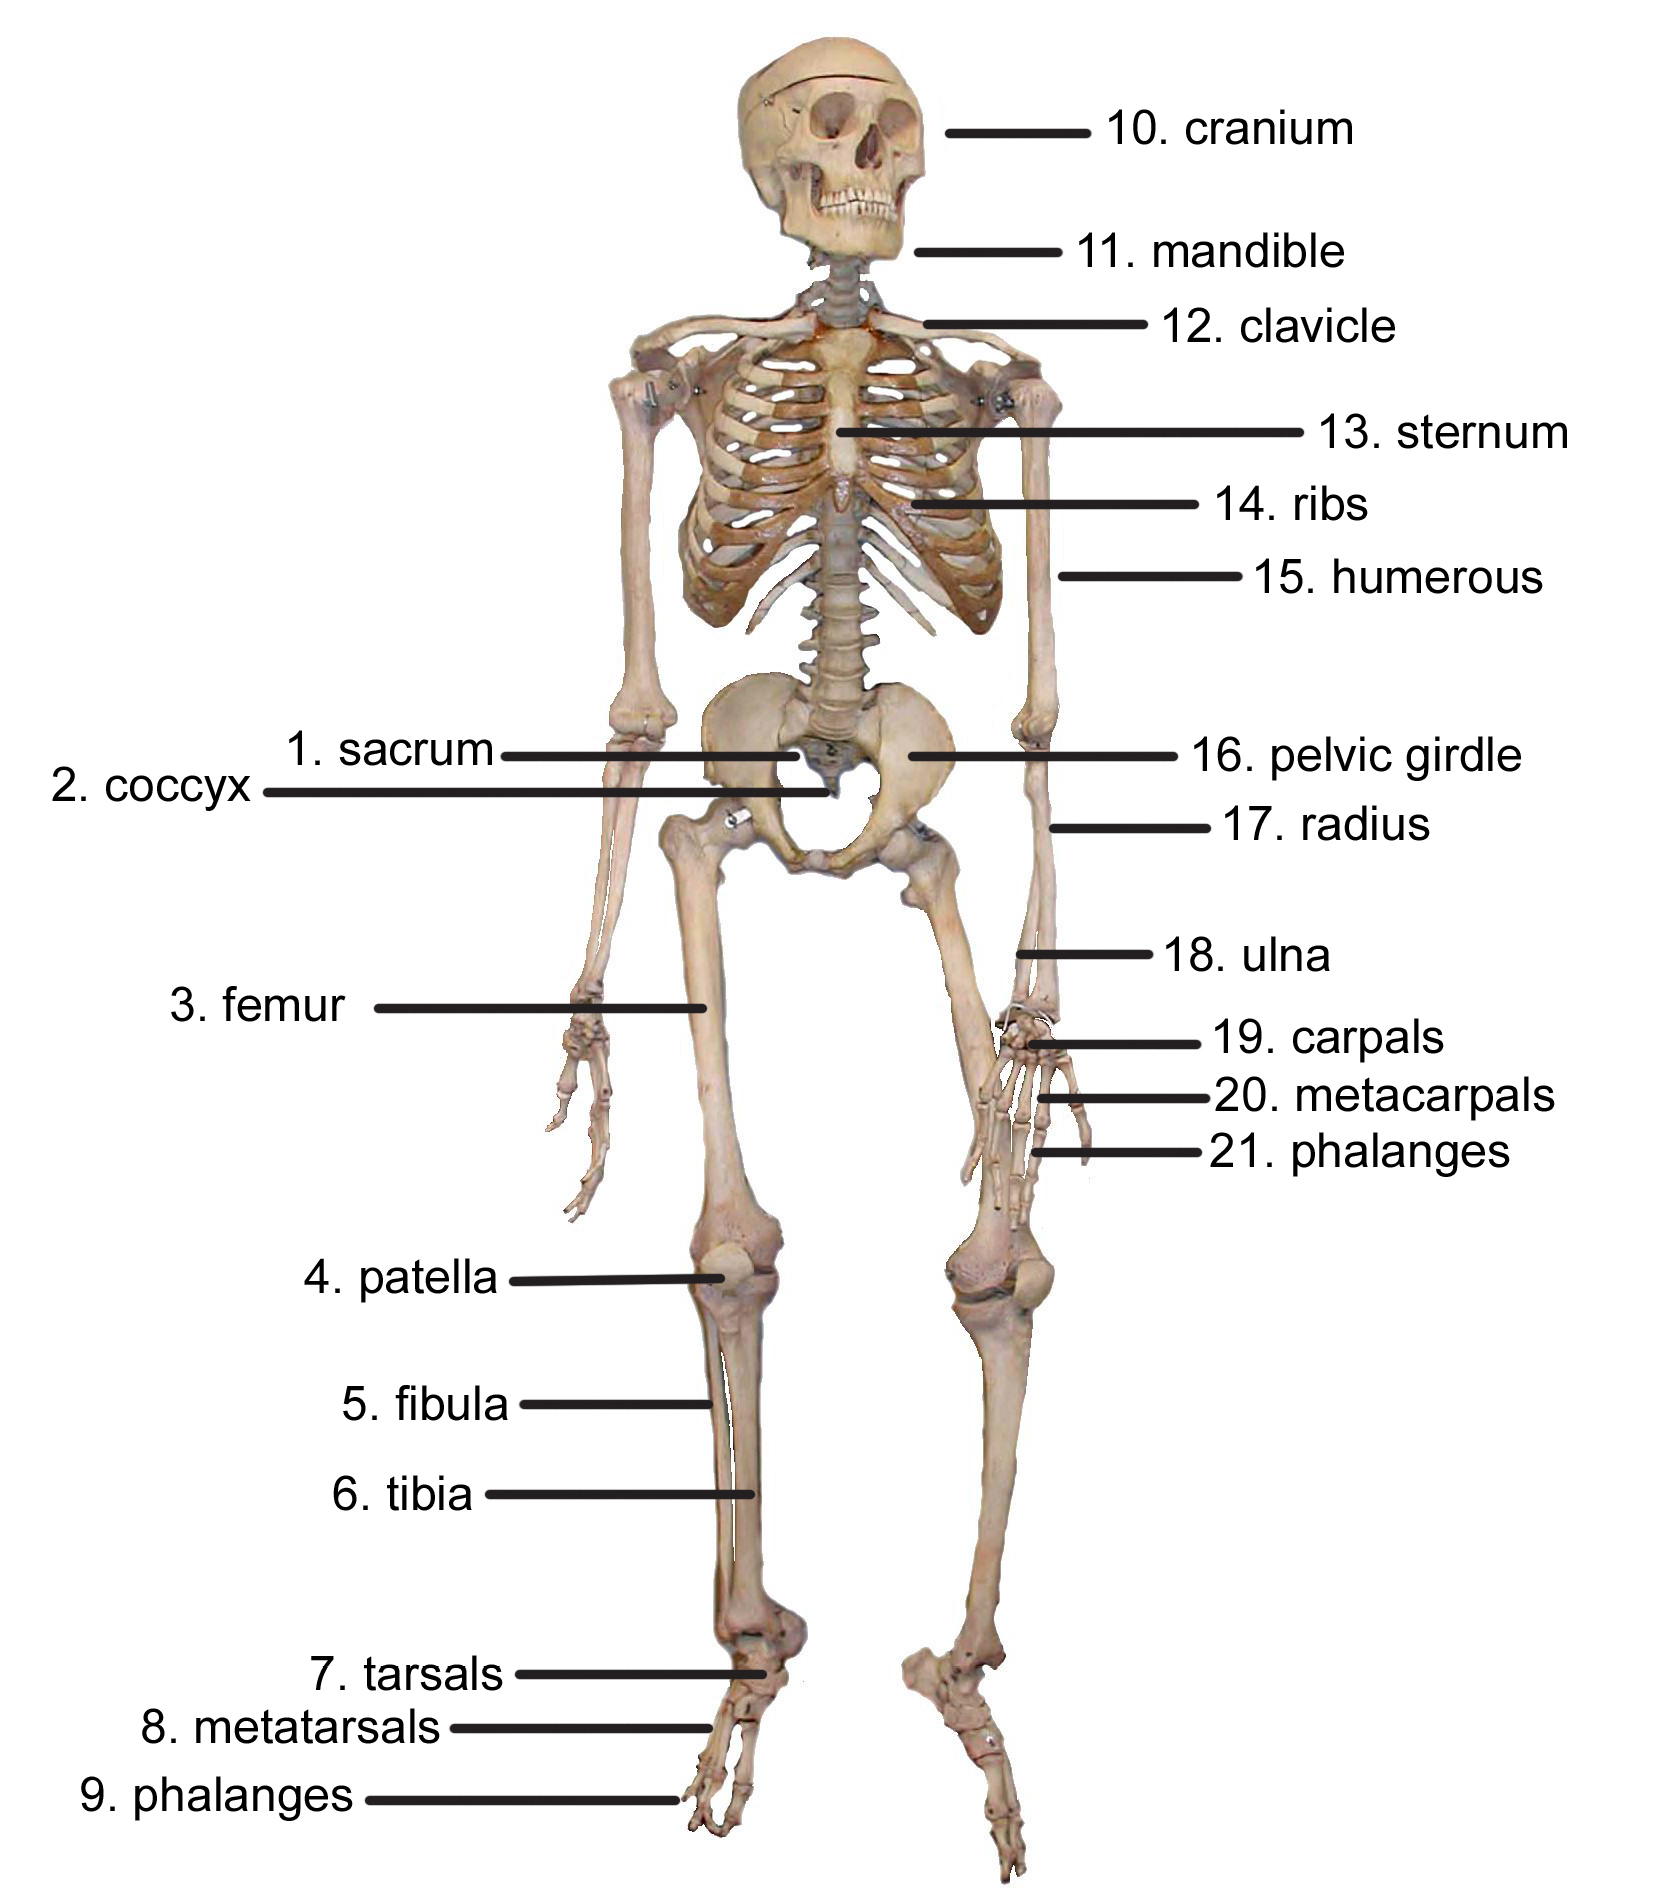 As commonly defined, the human body is the physical manifestation of a human being, a collection of chemical elements, mobile electrons, and electromagnetic fields present in extracellular materials and cellular components organized hierarchically into cells, tissues, organs,and organ systems. Cybersurgeons